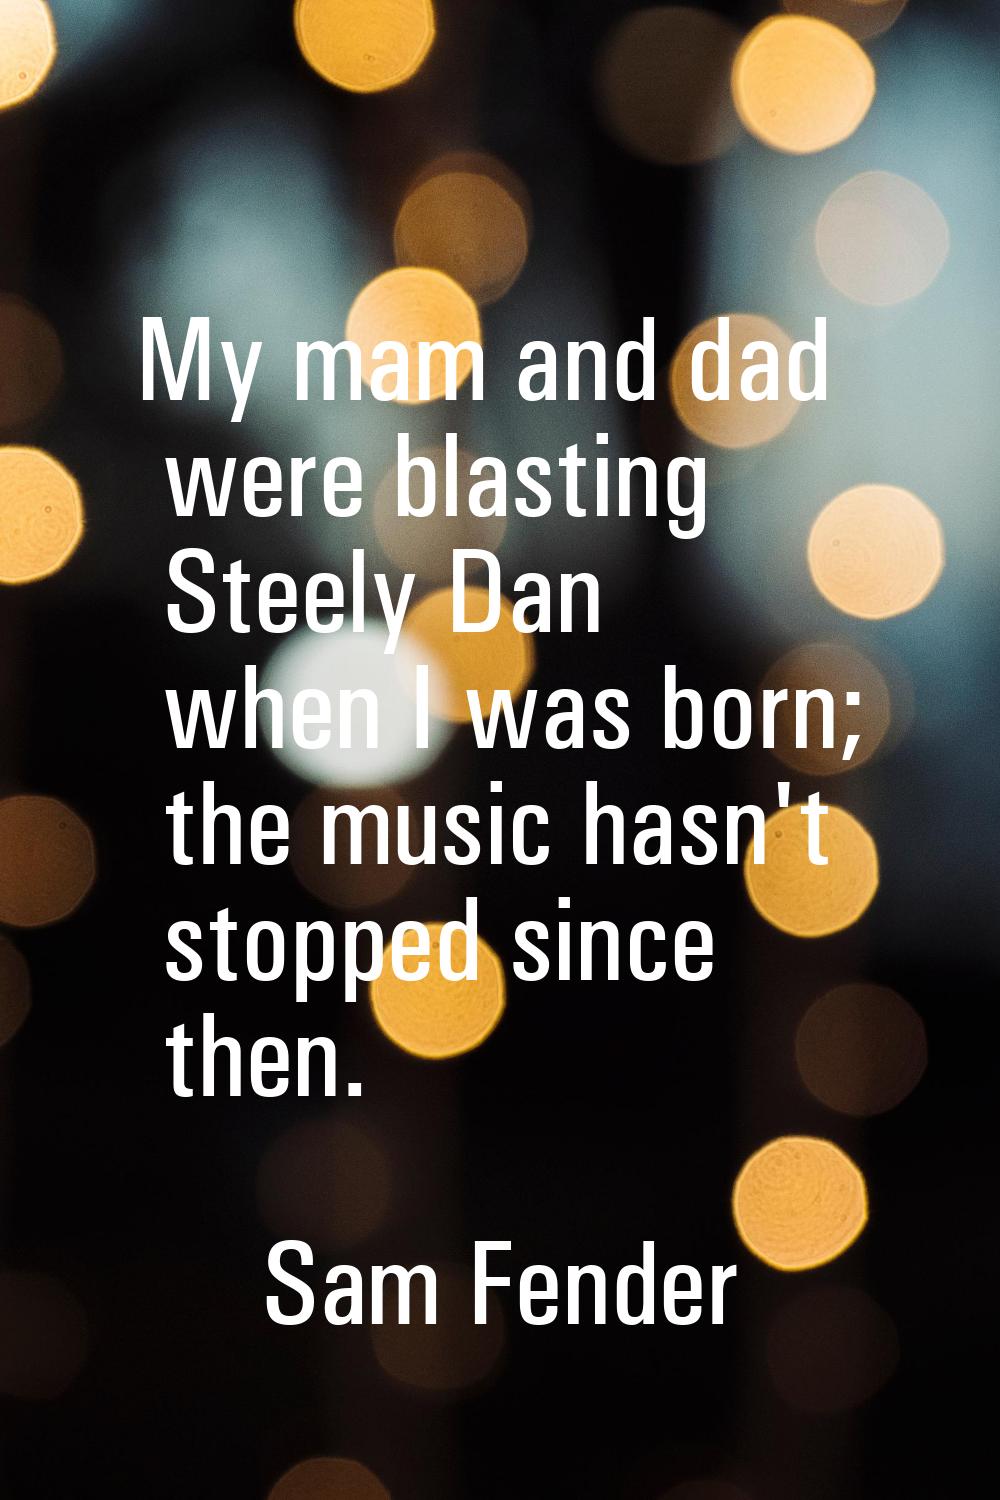 My mam and dad were blasting Steely Dan when I was born; the music hasn't stopped since then.